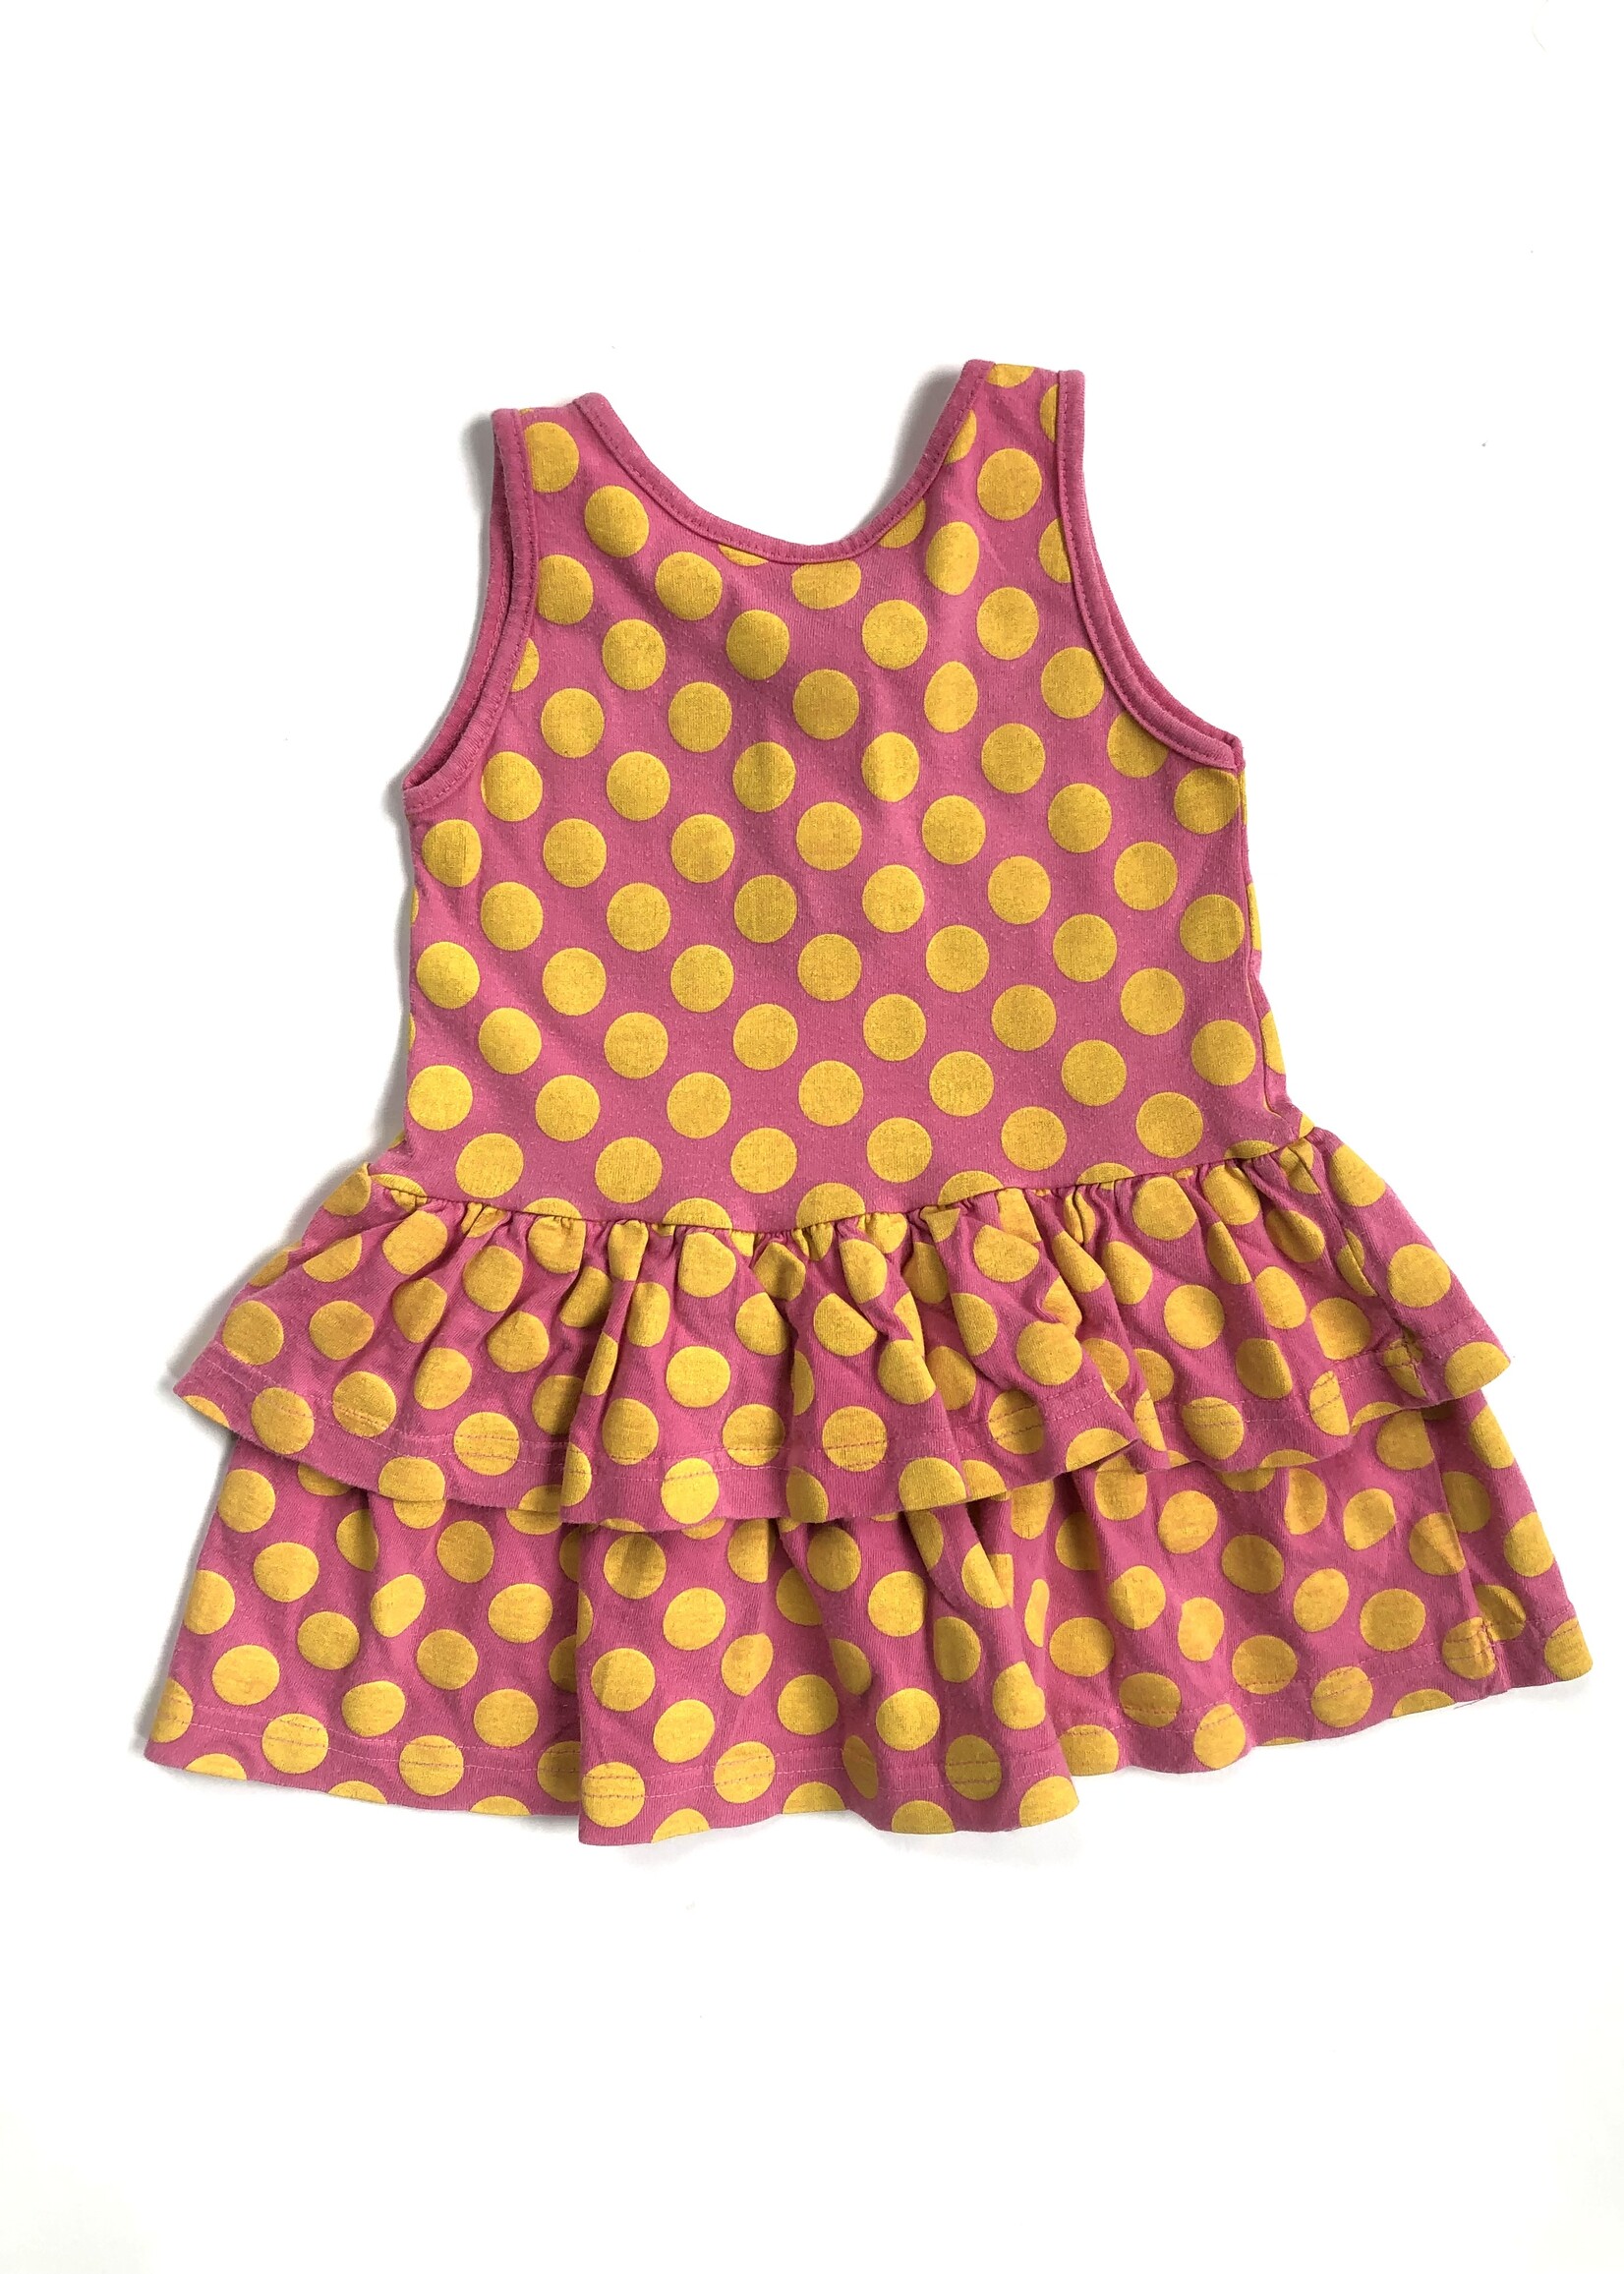 Vintage Pink yellow dotted dress 18m